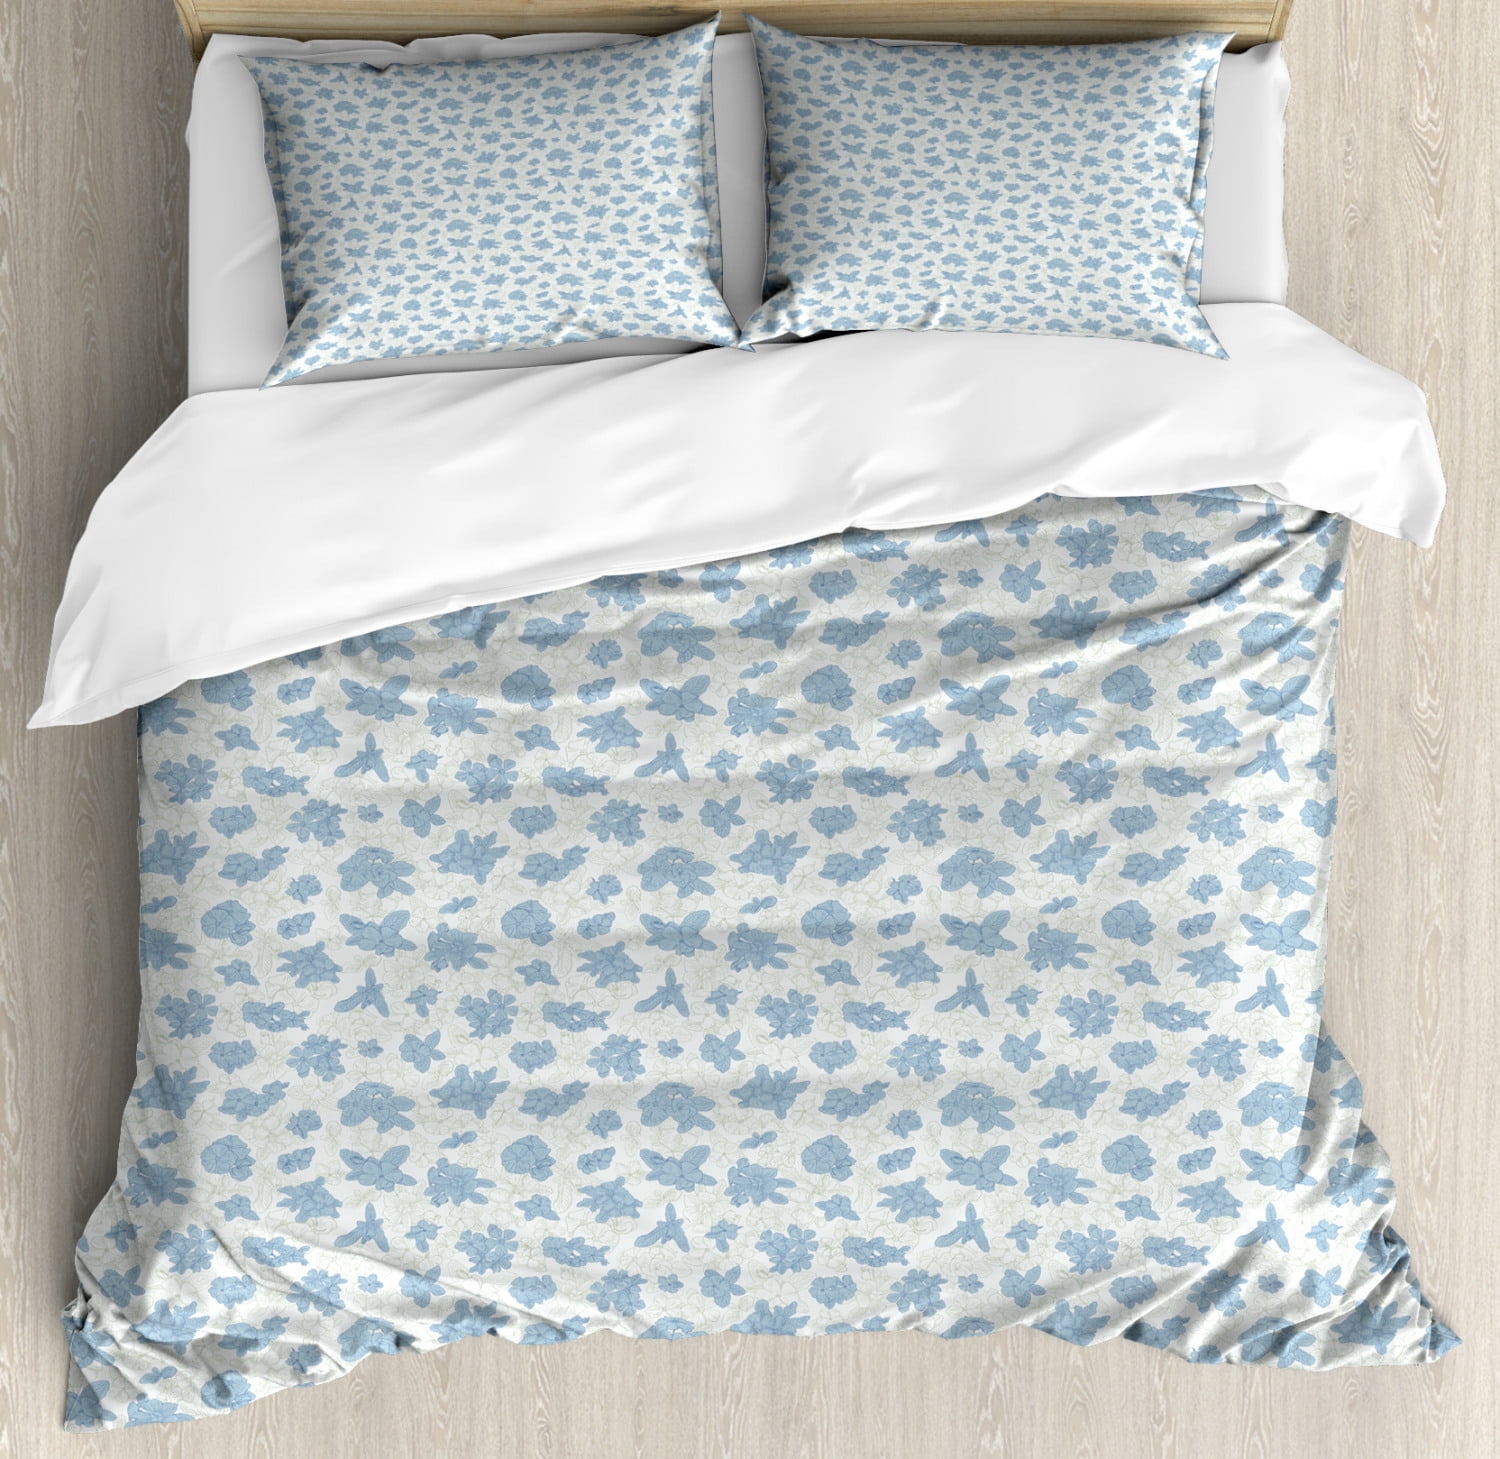 Floral Duvet Cover Set, Pattern with Willow Flowers Vintage Print ...